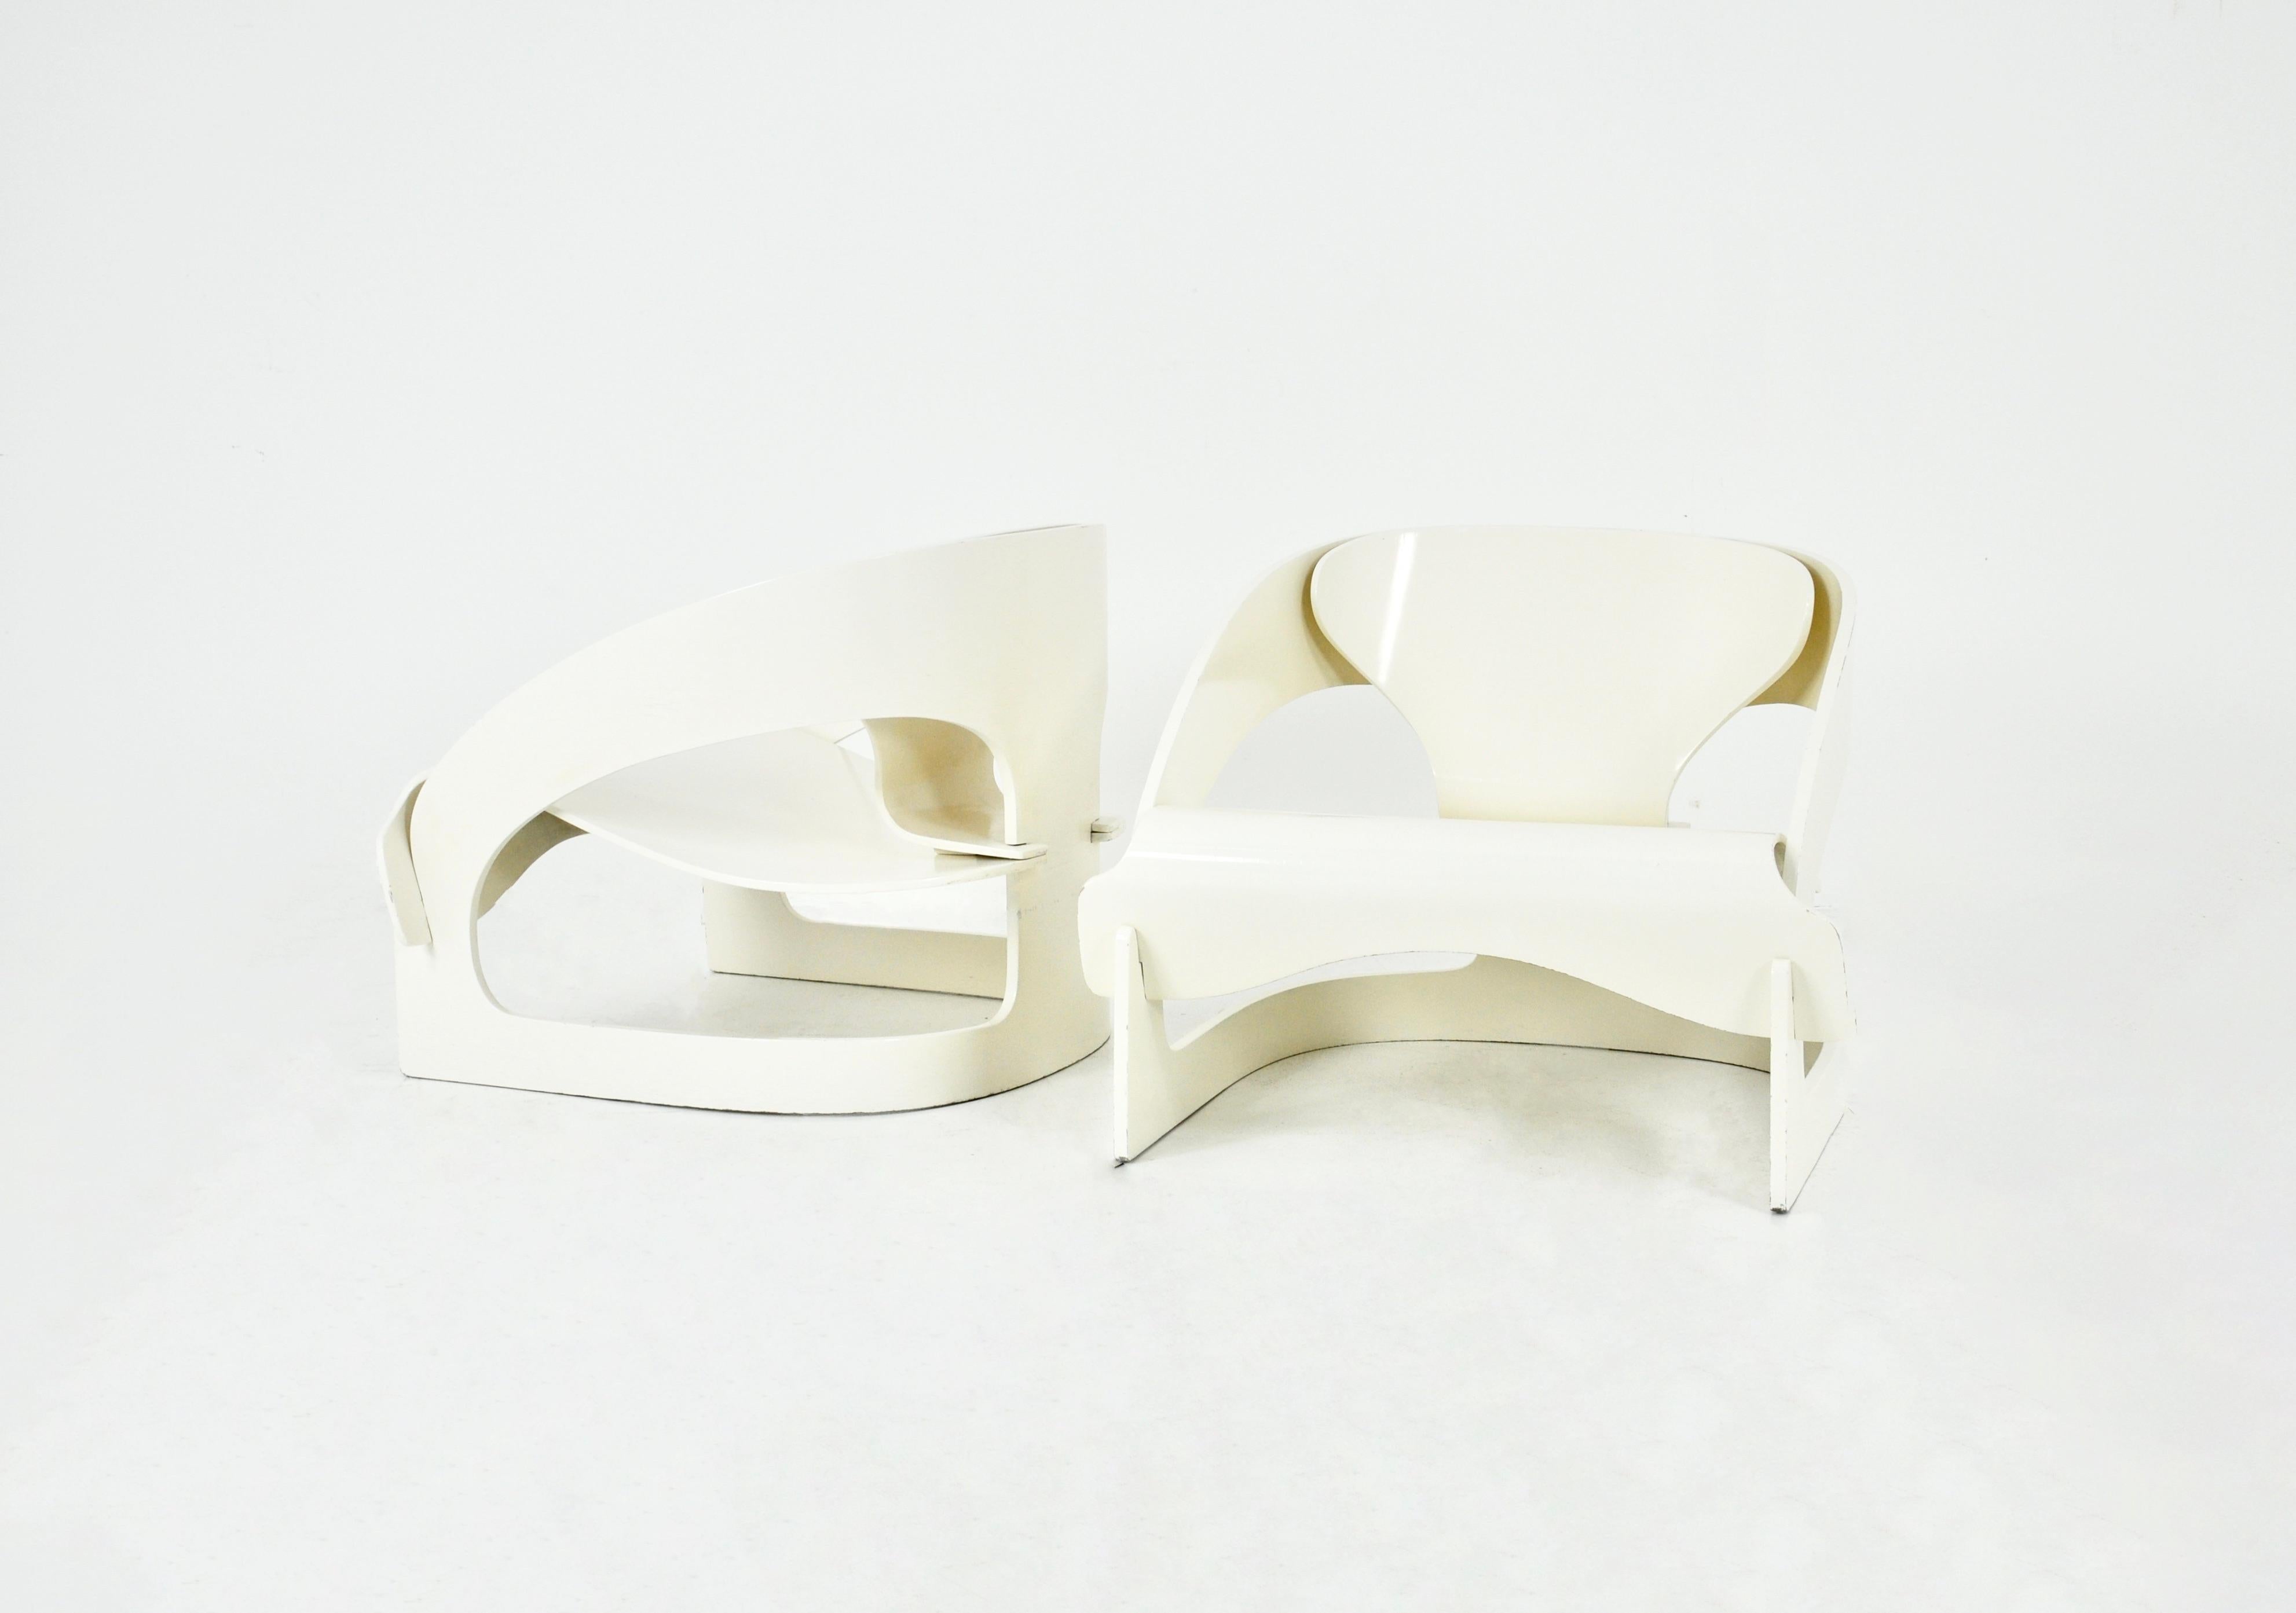 Set of 2 white wooden armchairs designed by Joe Colombo, Model 4801.  Numbered 16. Seat height 34cm. Wear due to time and age.